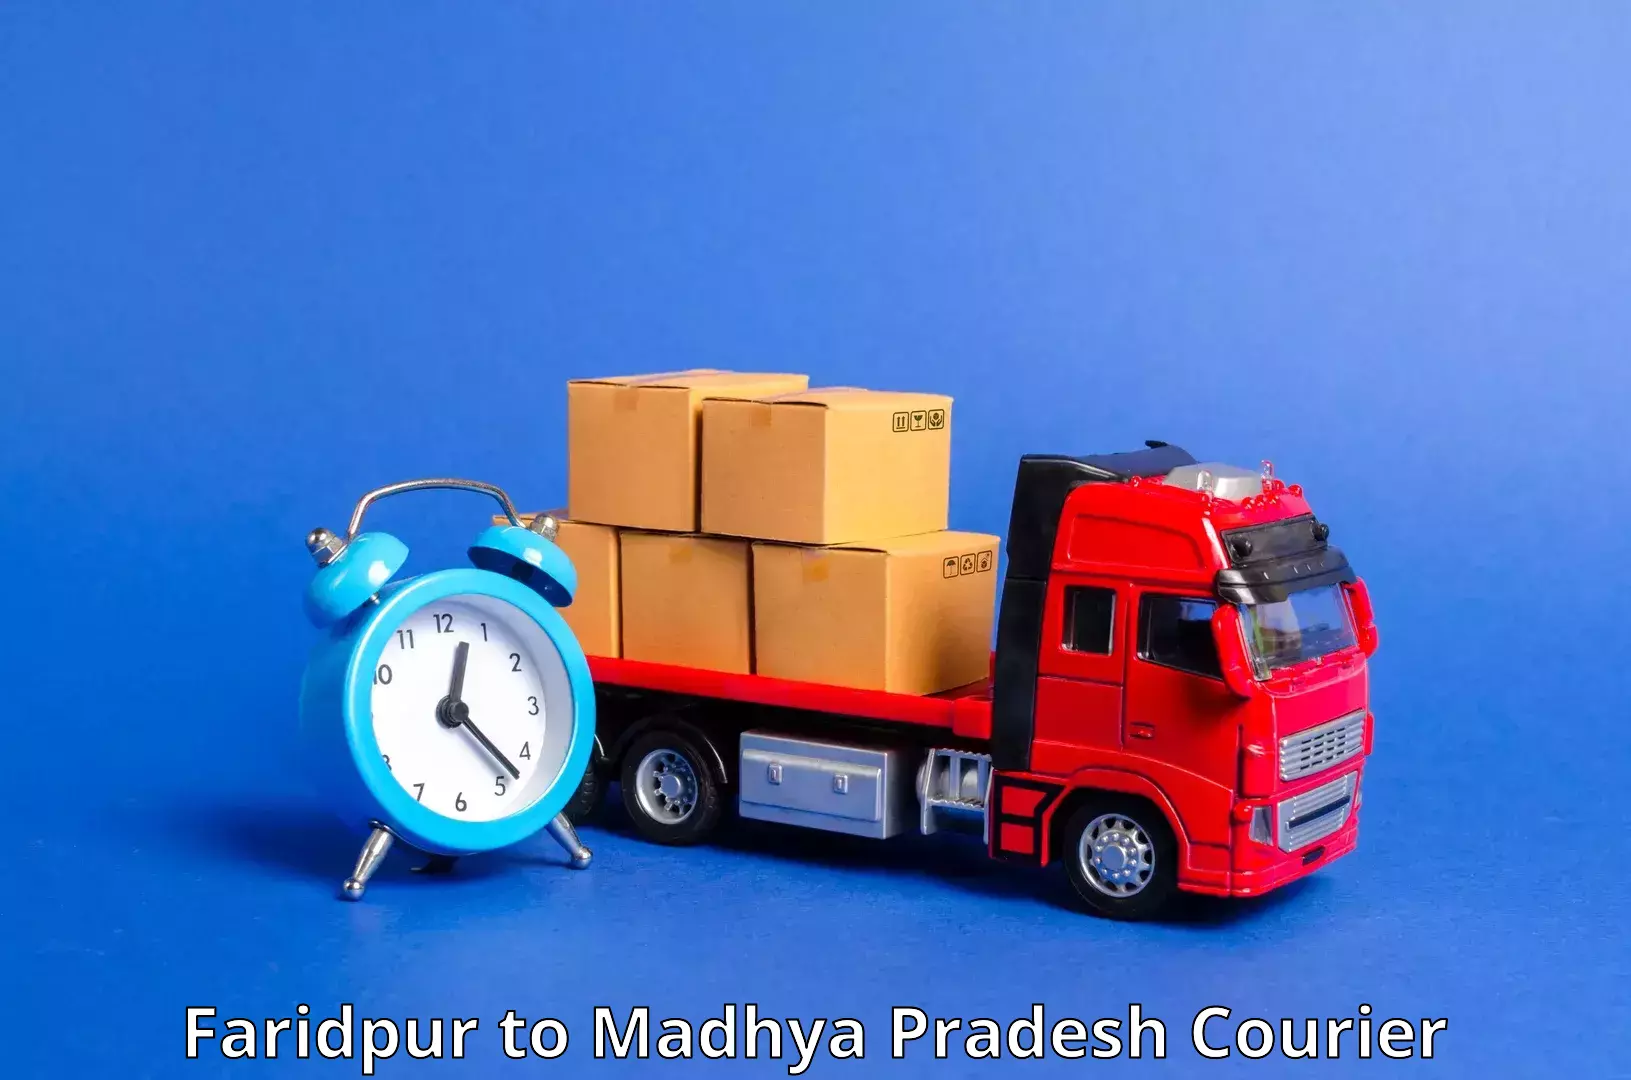 Small business couriers Faridpur to IIIT Bhopal